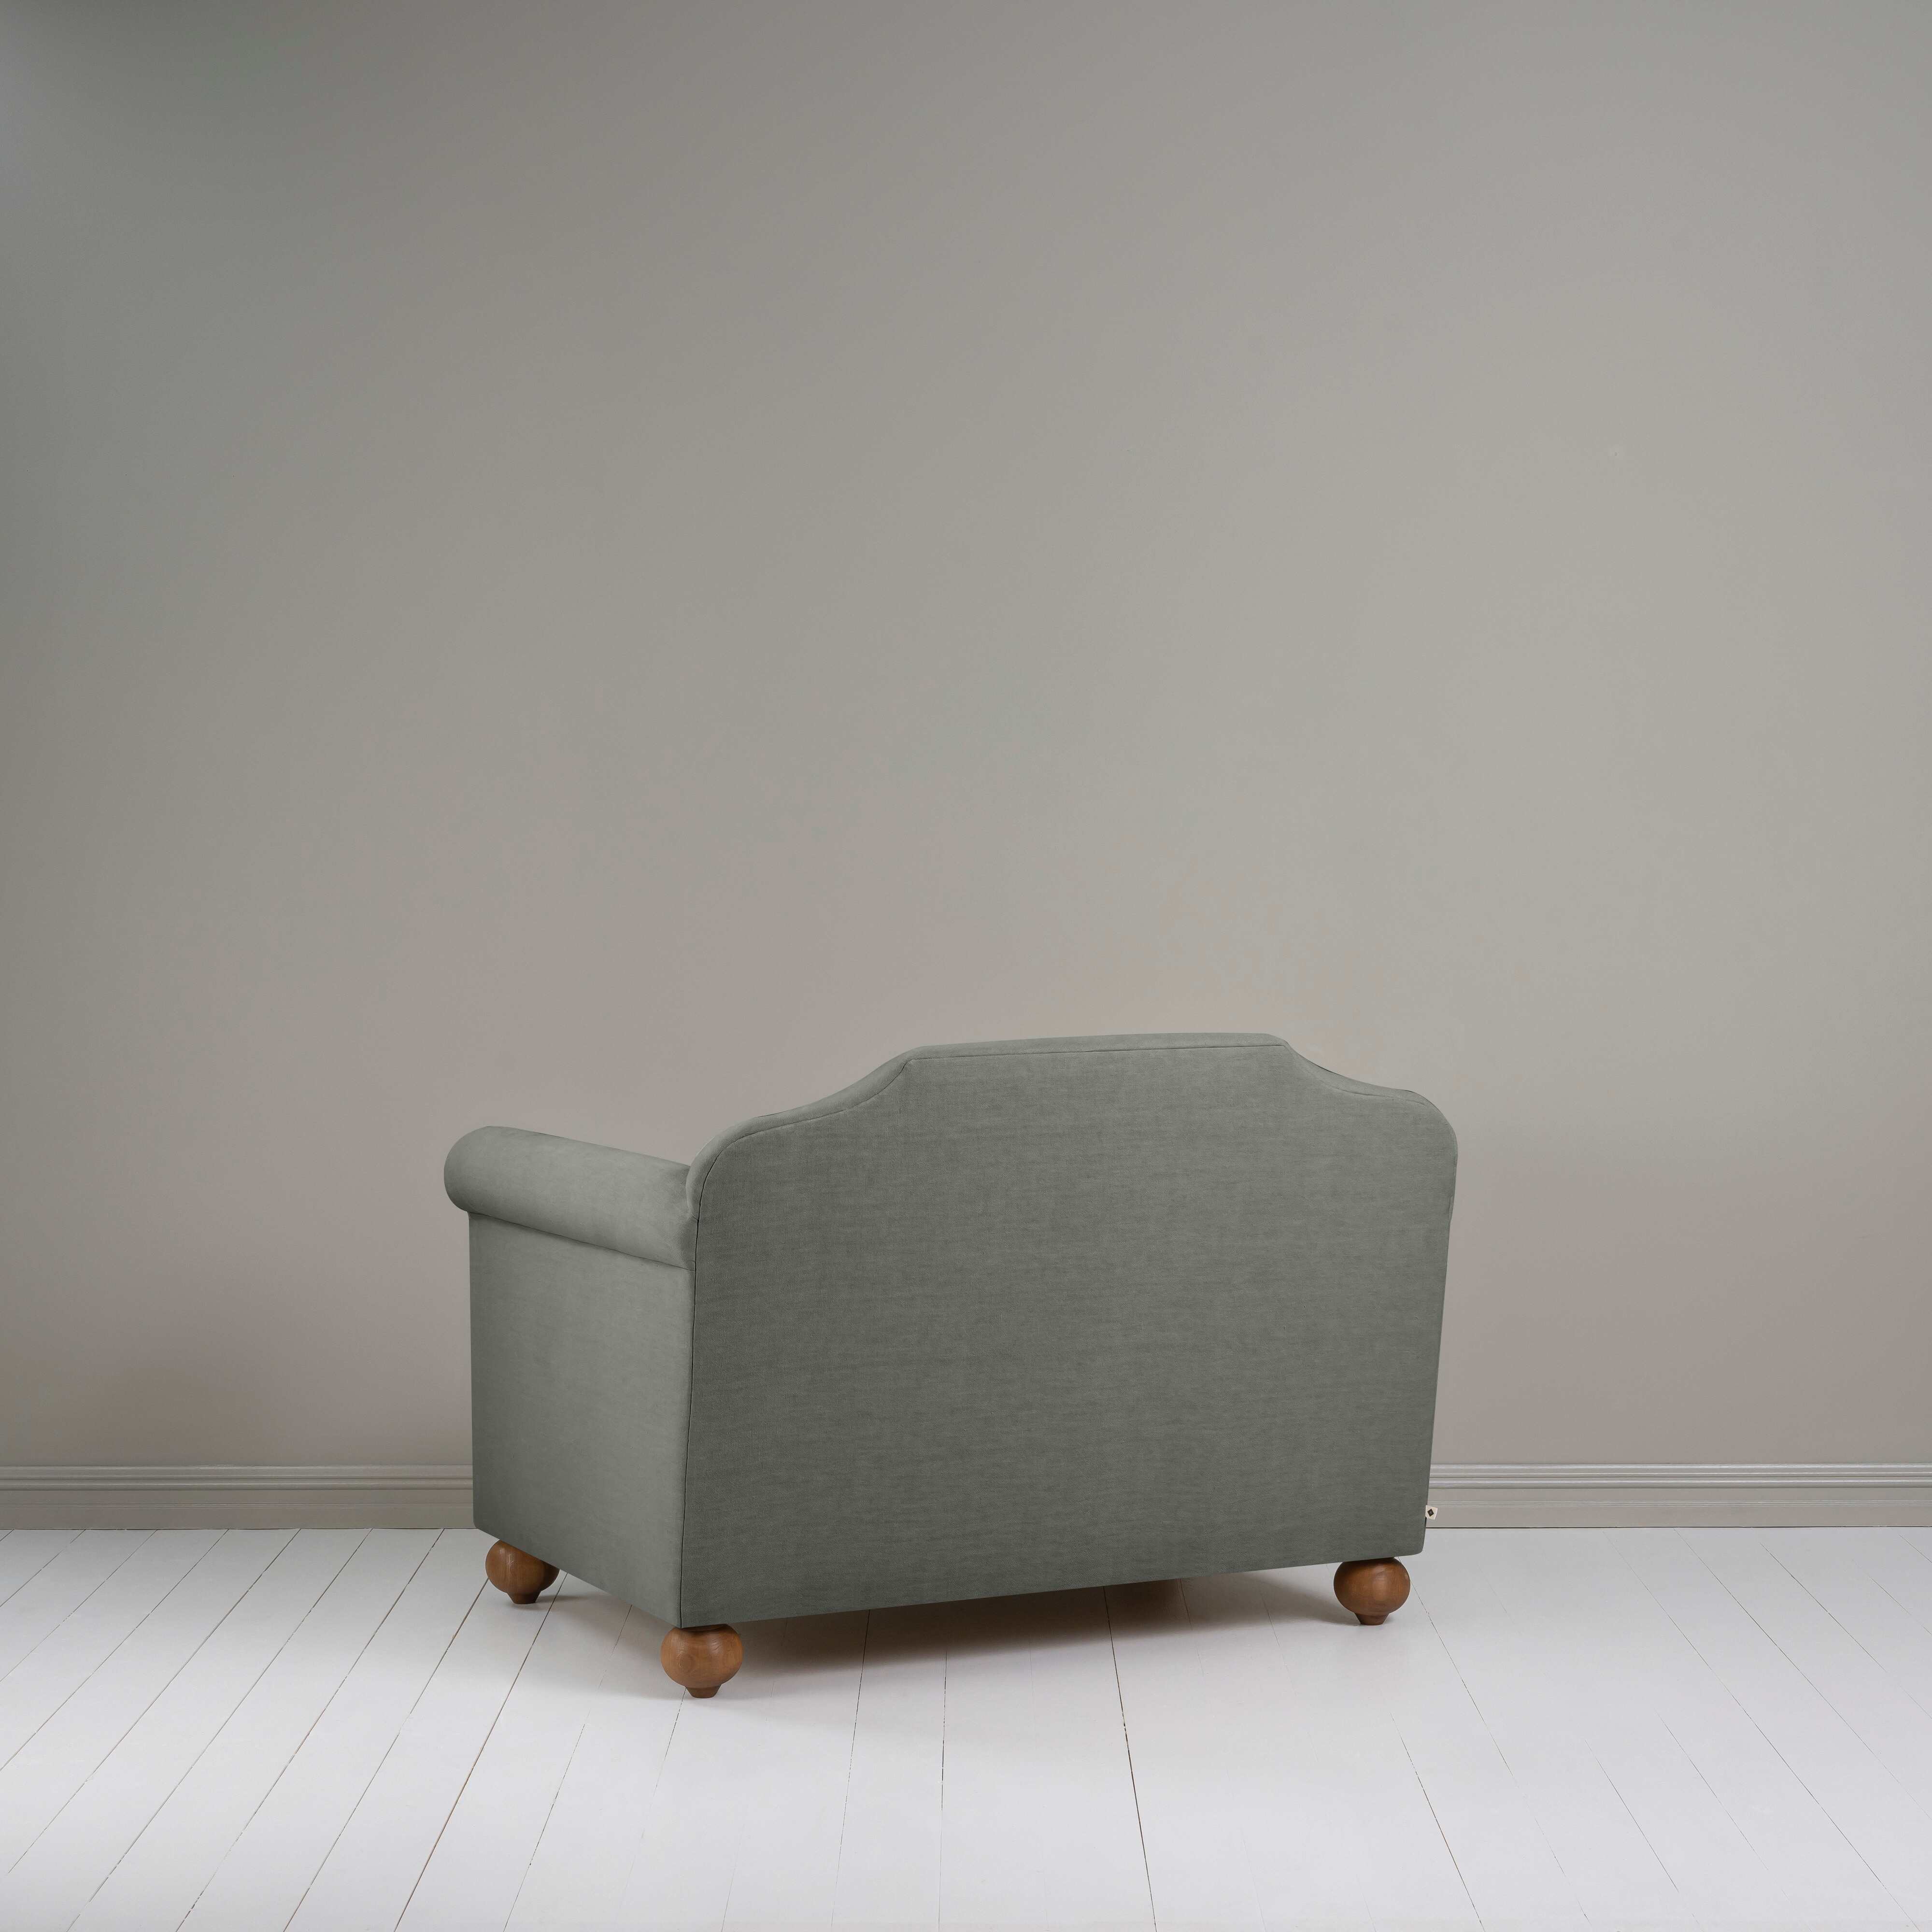  Dolittle Love Seat in Laidback Linen Shadow 